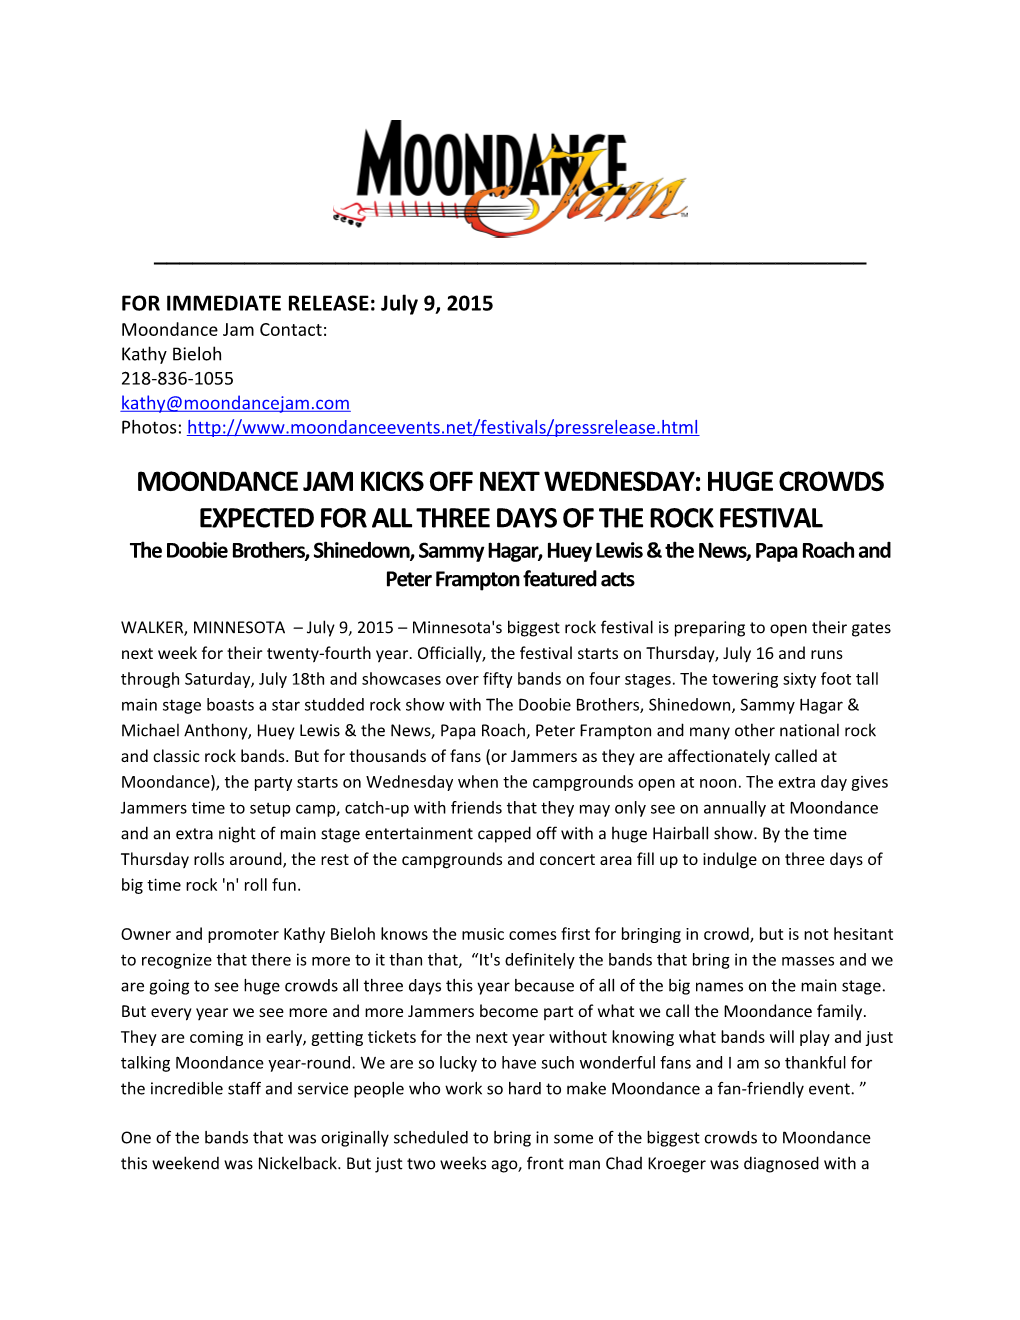 FOR IMMEDIATE RELEASE: July 9, 2015 Moondance Jam Contact: Kathy Bieloh 218-836-1055 Photos